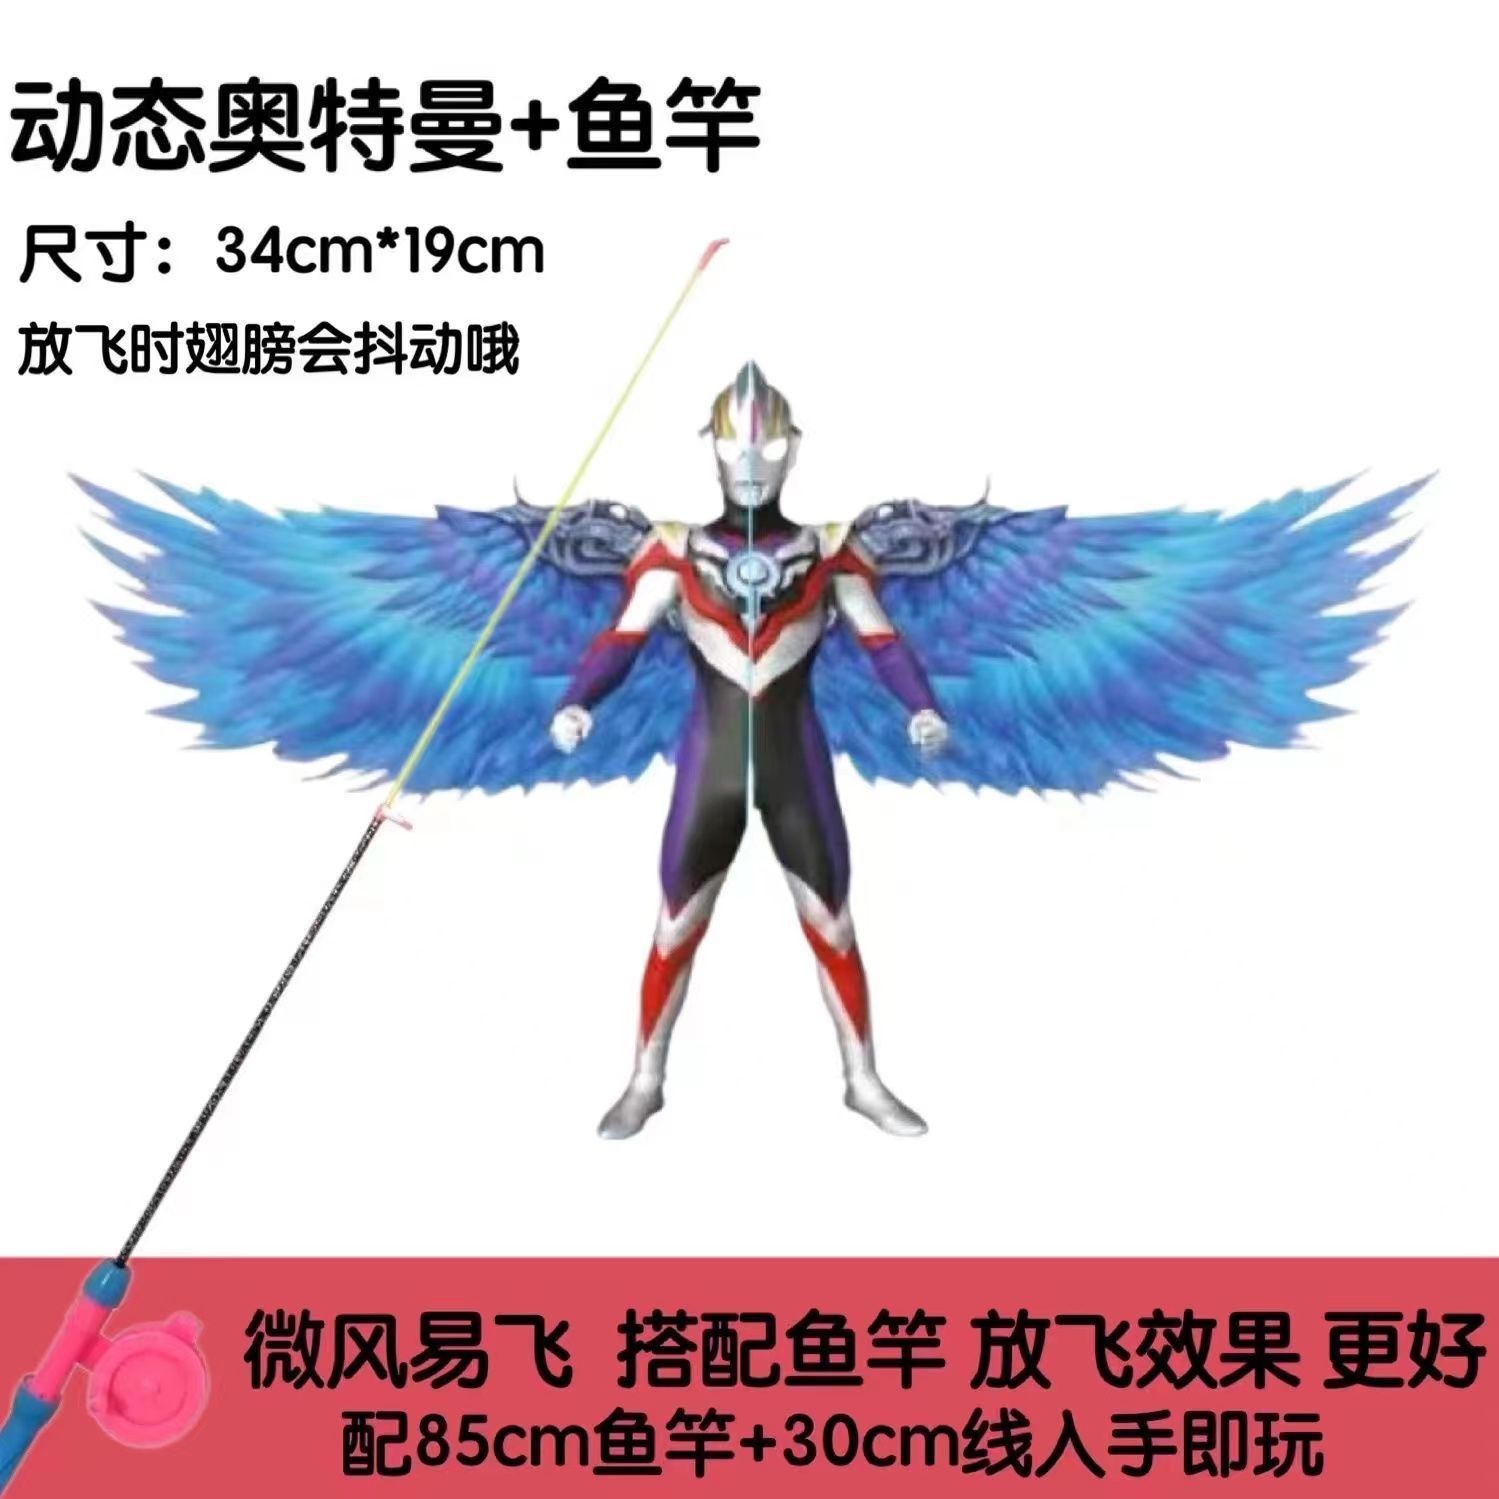 Fishing Rod Kite Dynamic Kite Mini Eagle Swallow Butterfly Children's Hand-Held Breeze Easy to Fly String Plastic Small Kite